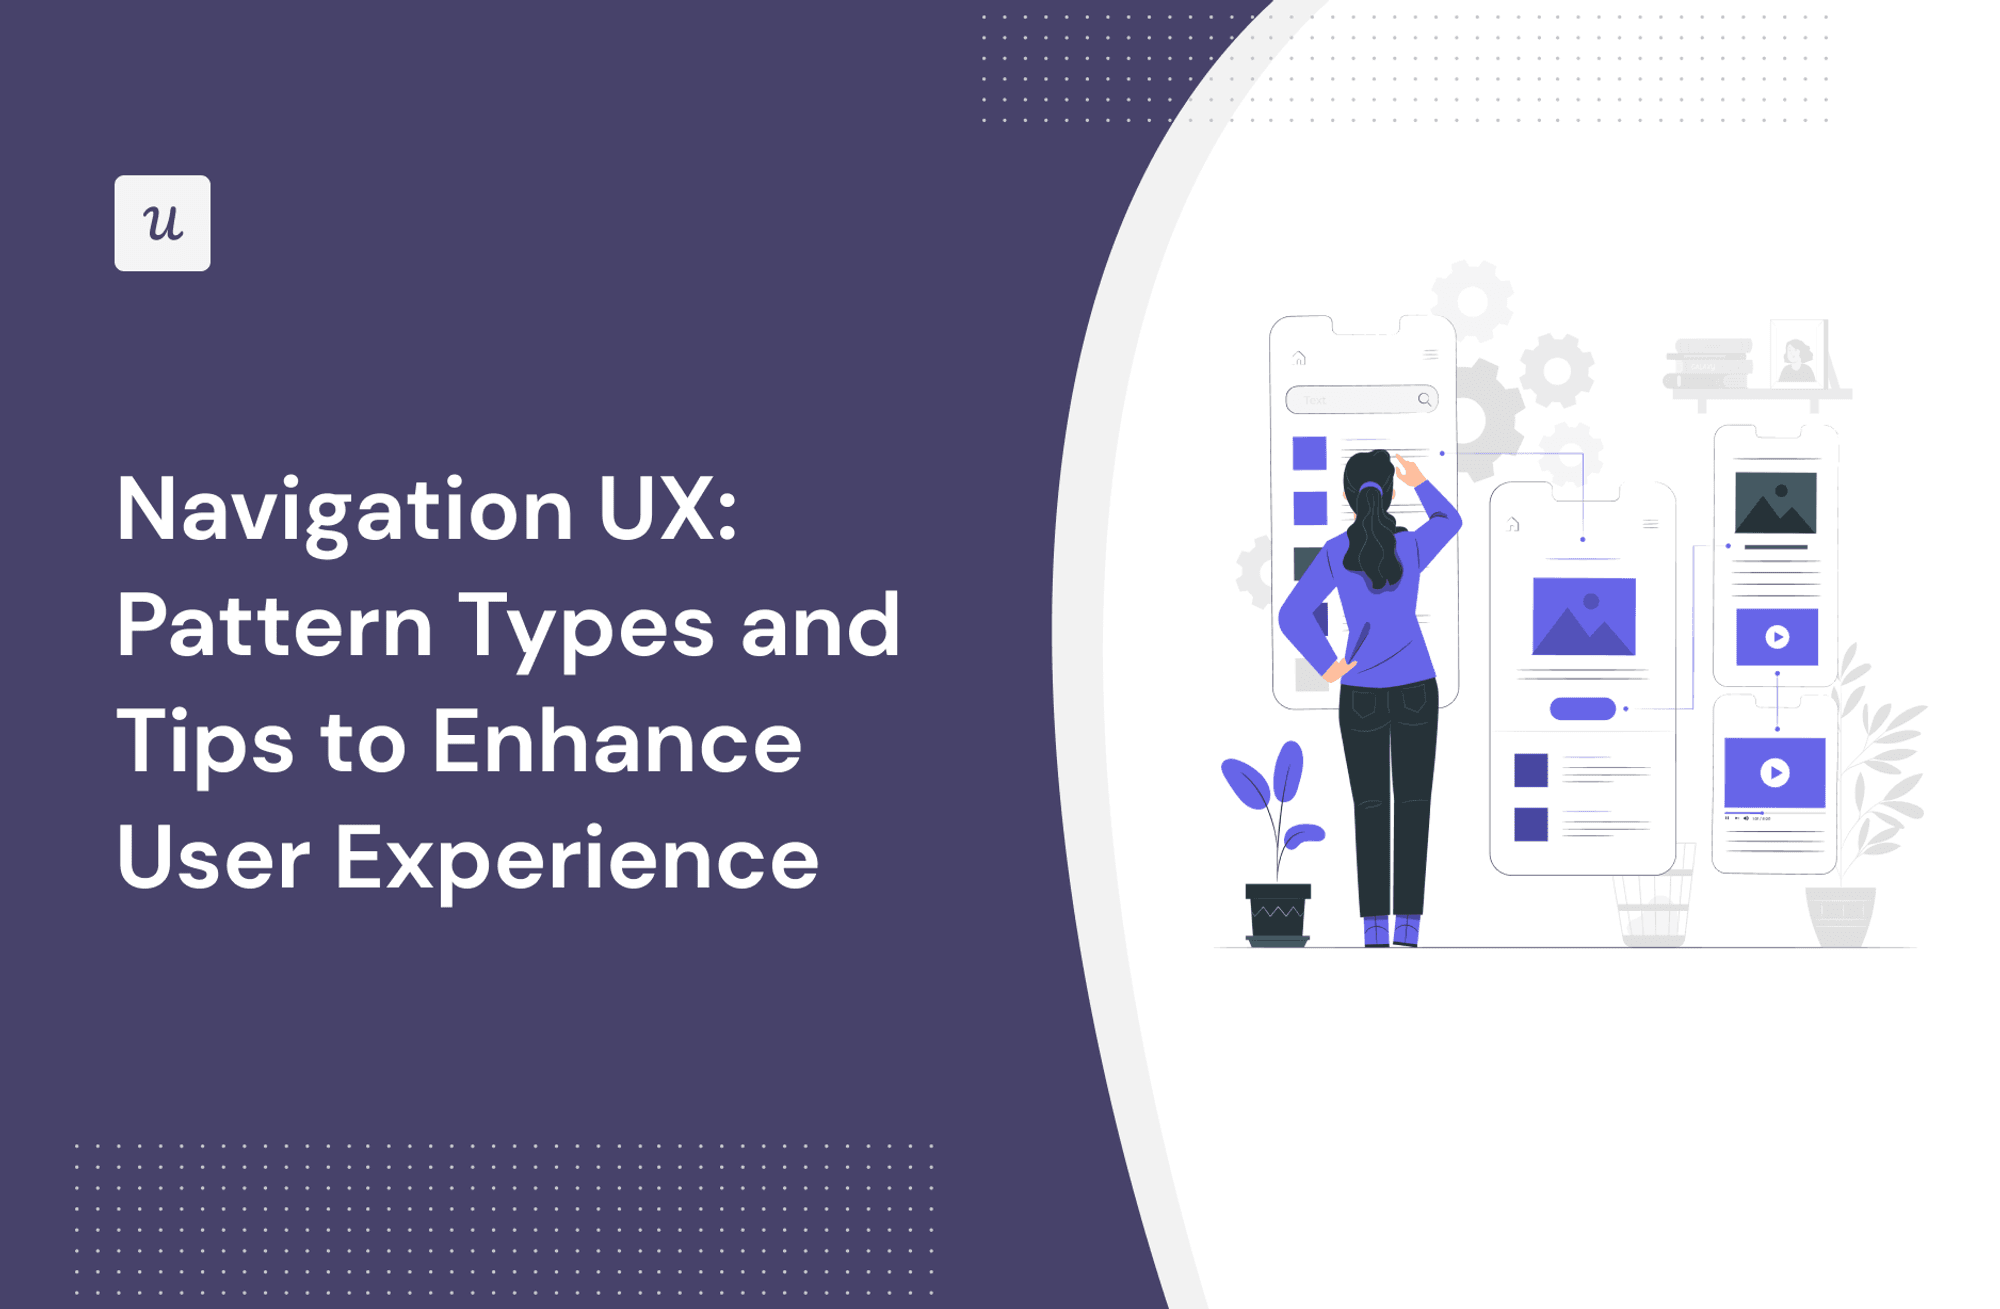 Navigation UX: Pattern Types and Tips to Enhance User Experience cover